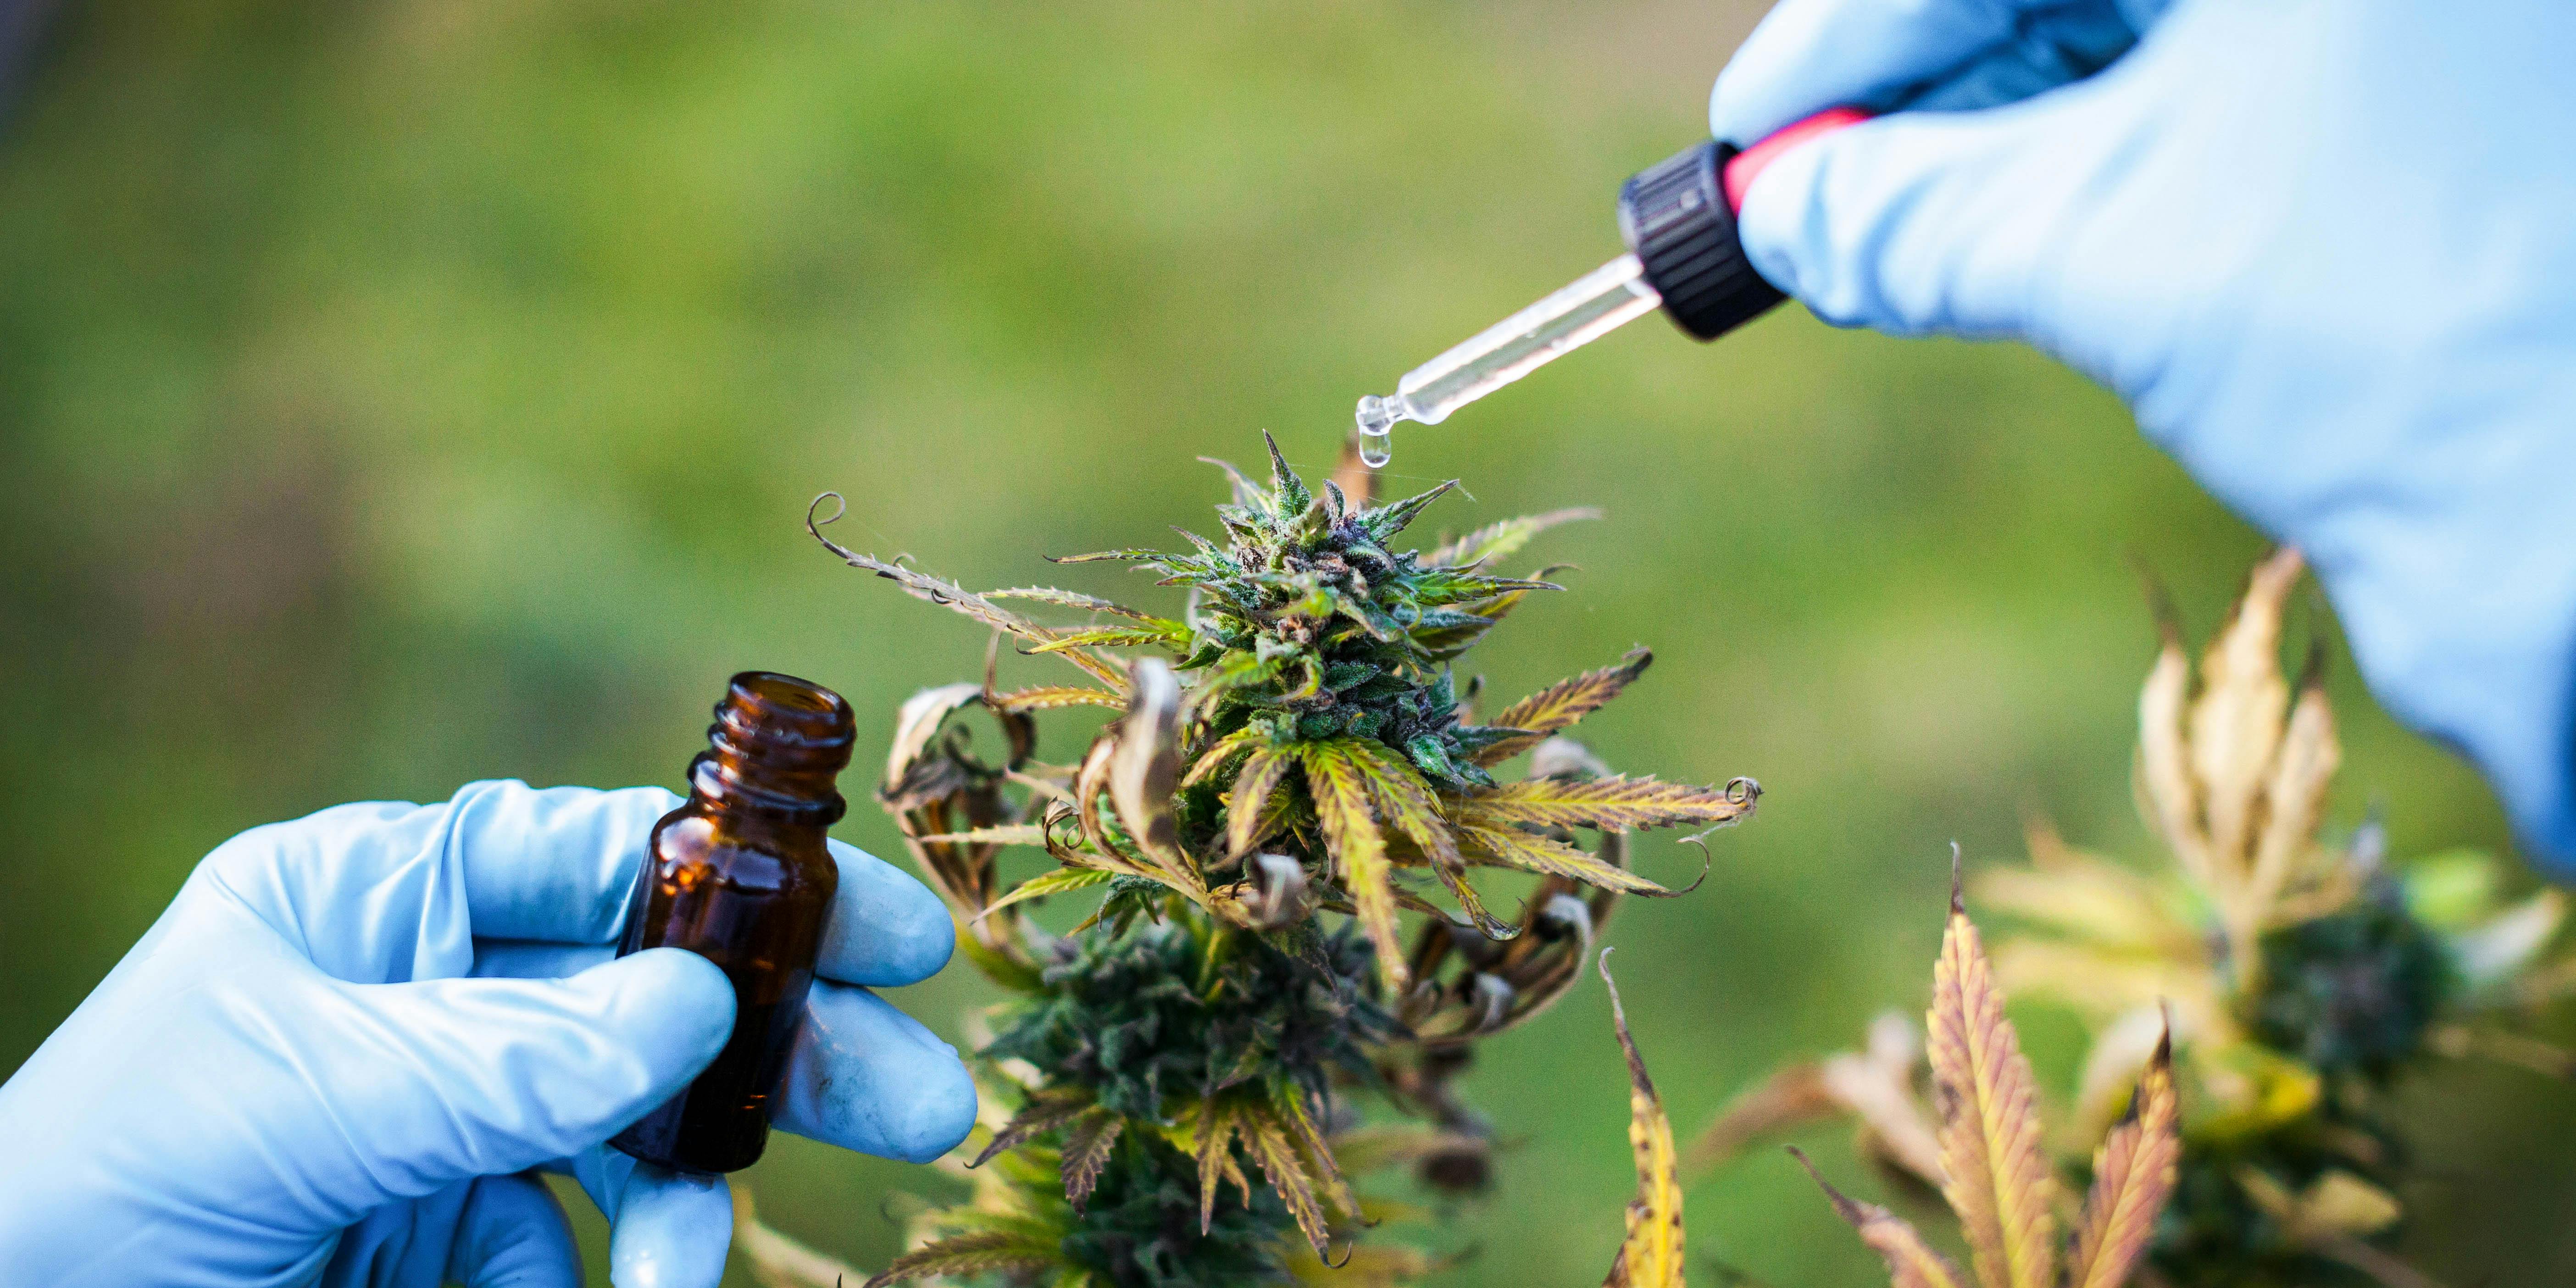 Cannabis For IBD: Study Explains Why Cannabis Works For Bowel Inflammation. Here, a young woman is shown preparing homeophatic medicine from a marijuana plant.